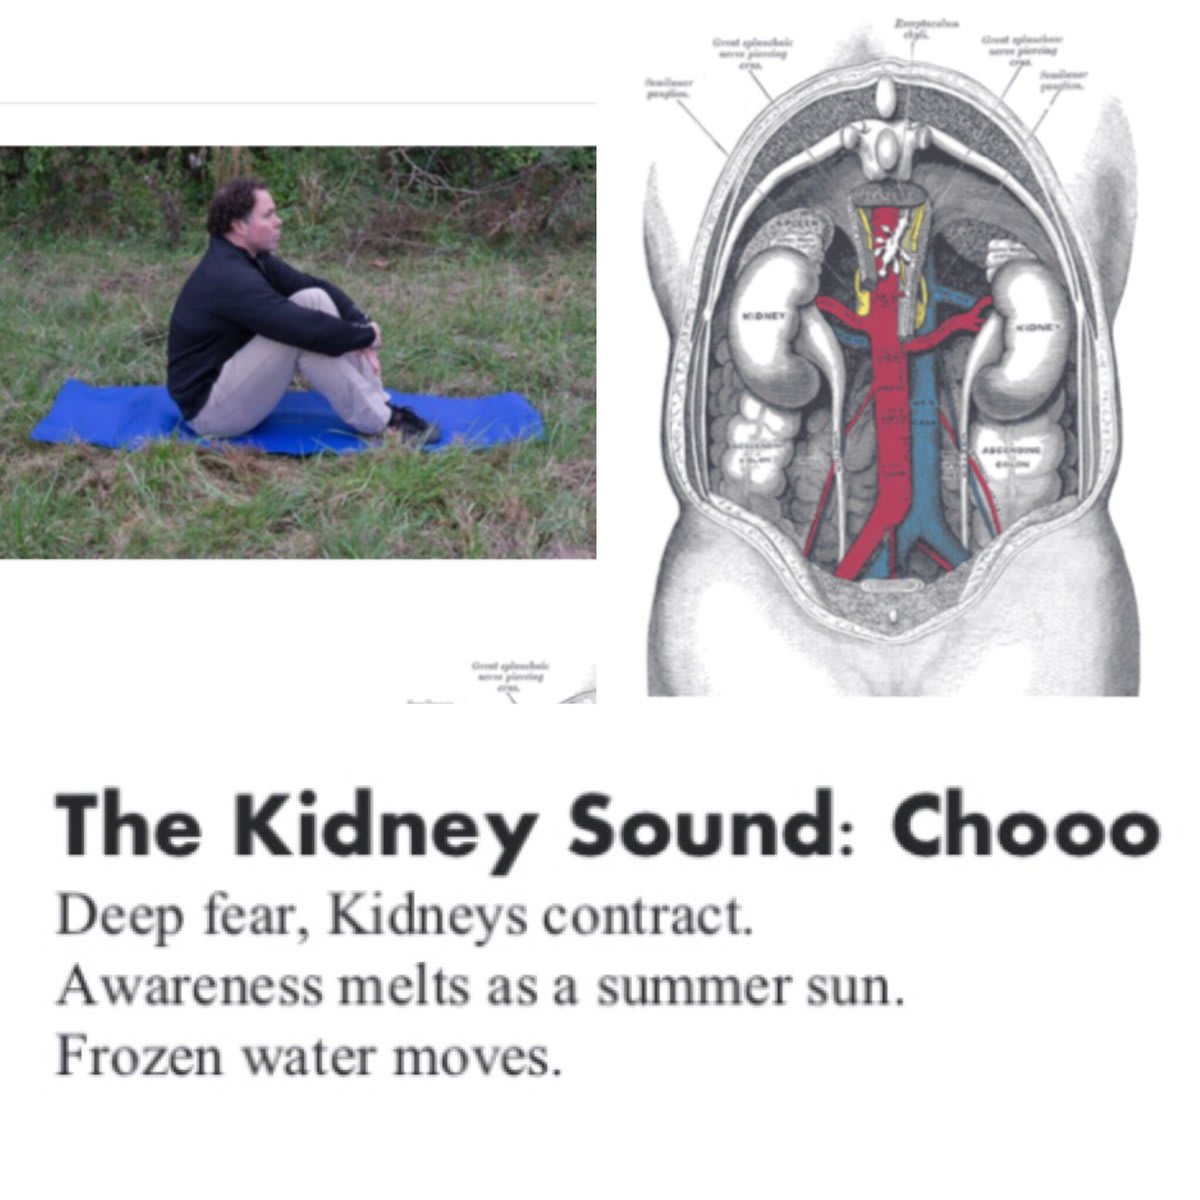 The kidney sound is one of the famous Six Healing Sounds from the Taoist tradition. The sound can be made in a low and guttural manner 3-6 times. In between making the sounds, one can turn awareness inward to the kidneys and express gratitude.